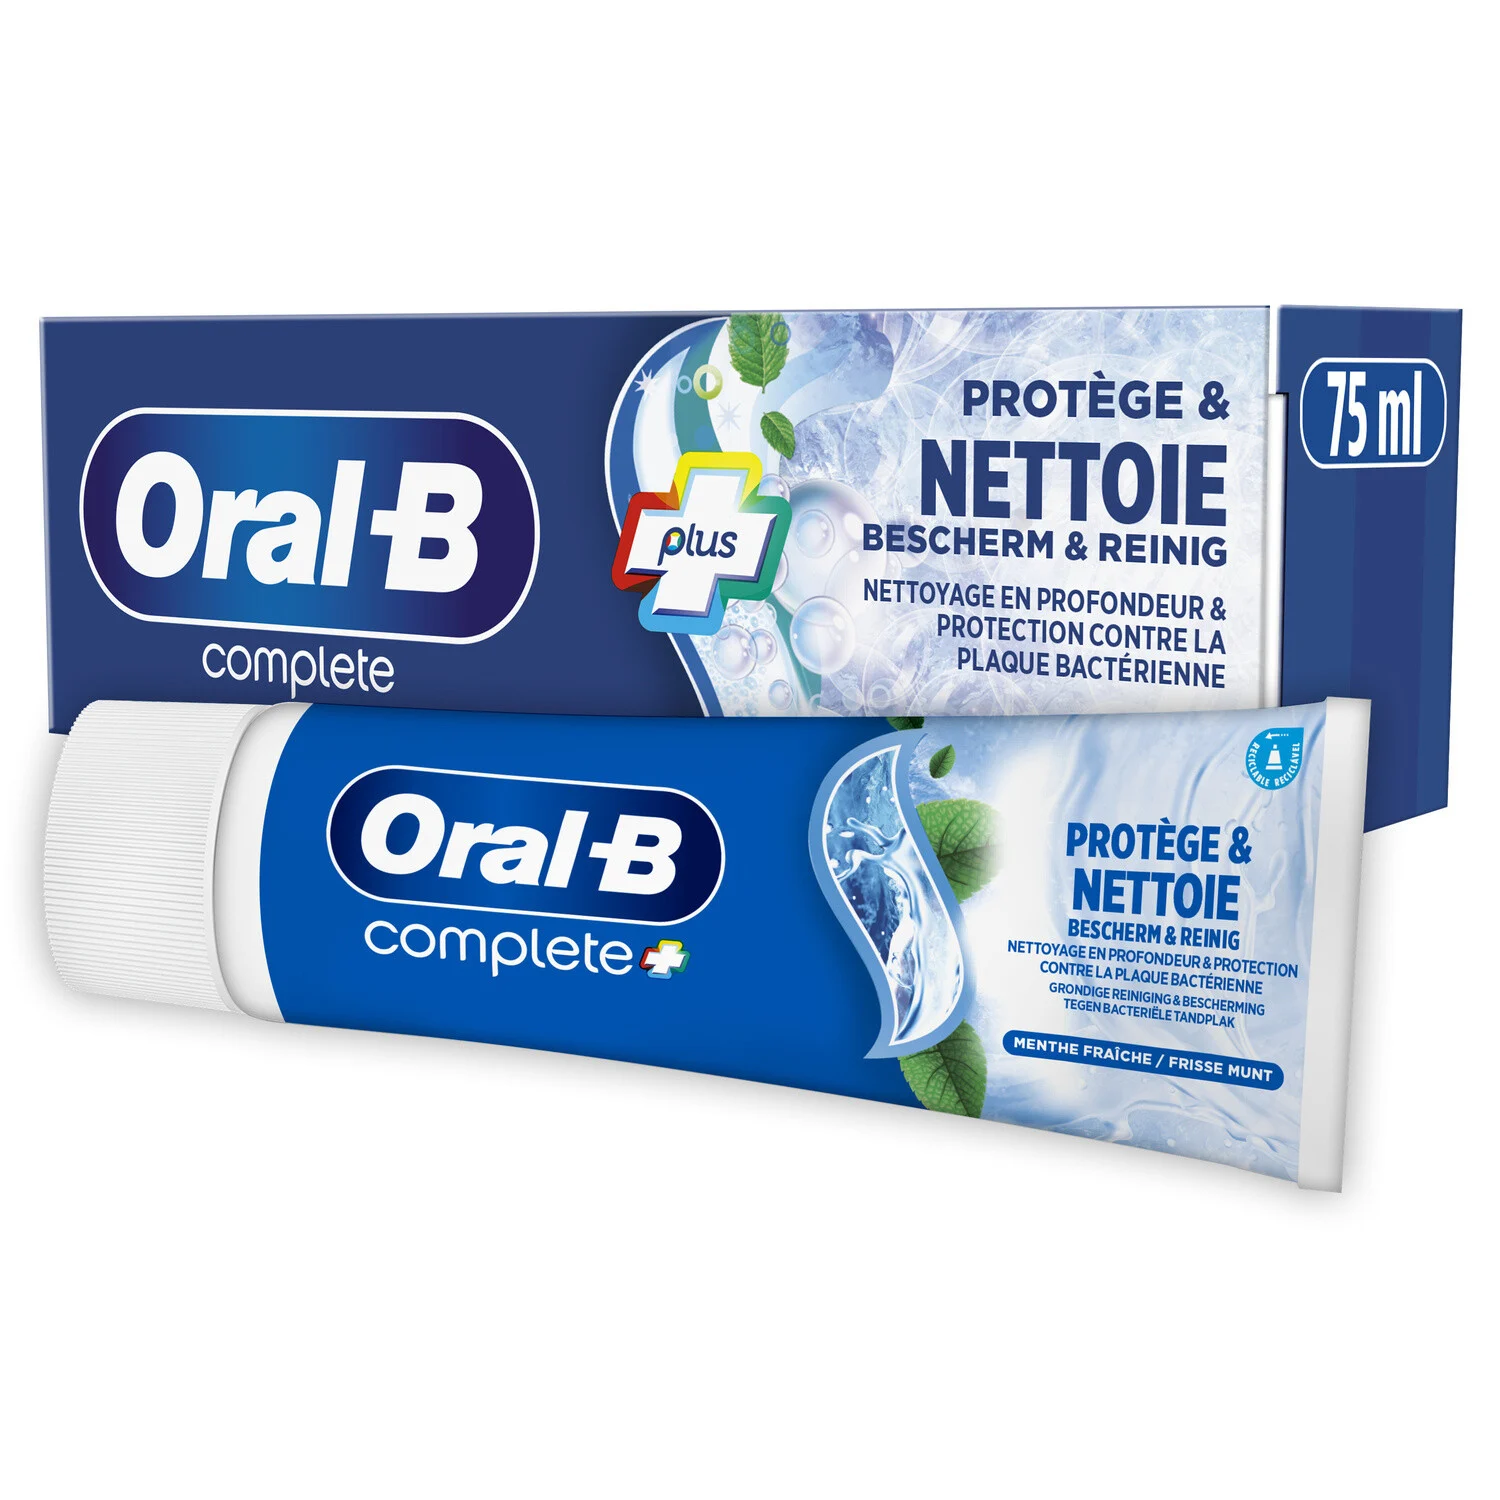 Red protectora Oral B Dent 75ml